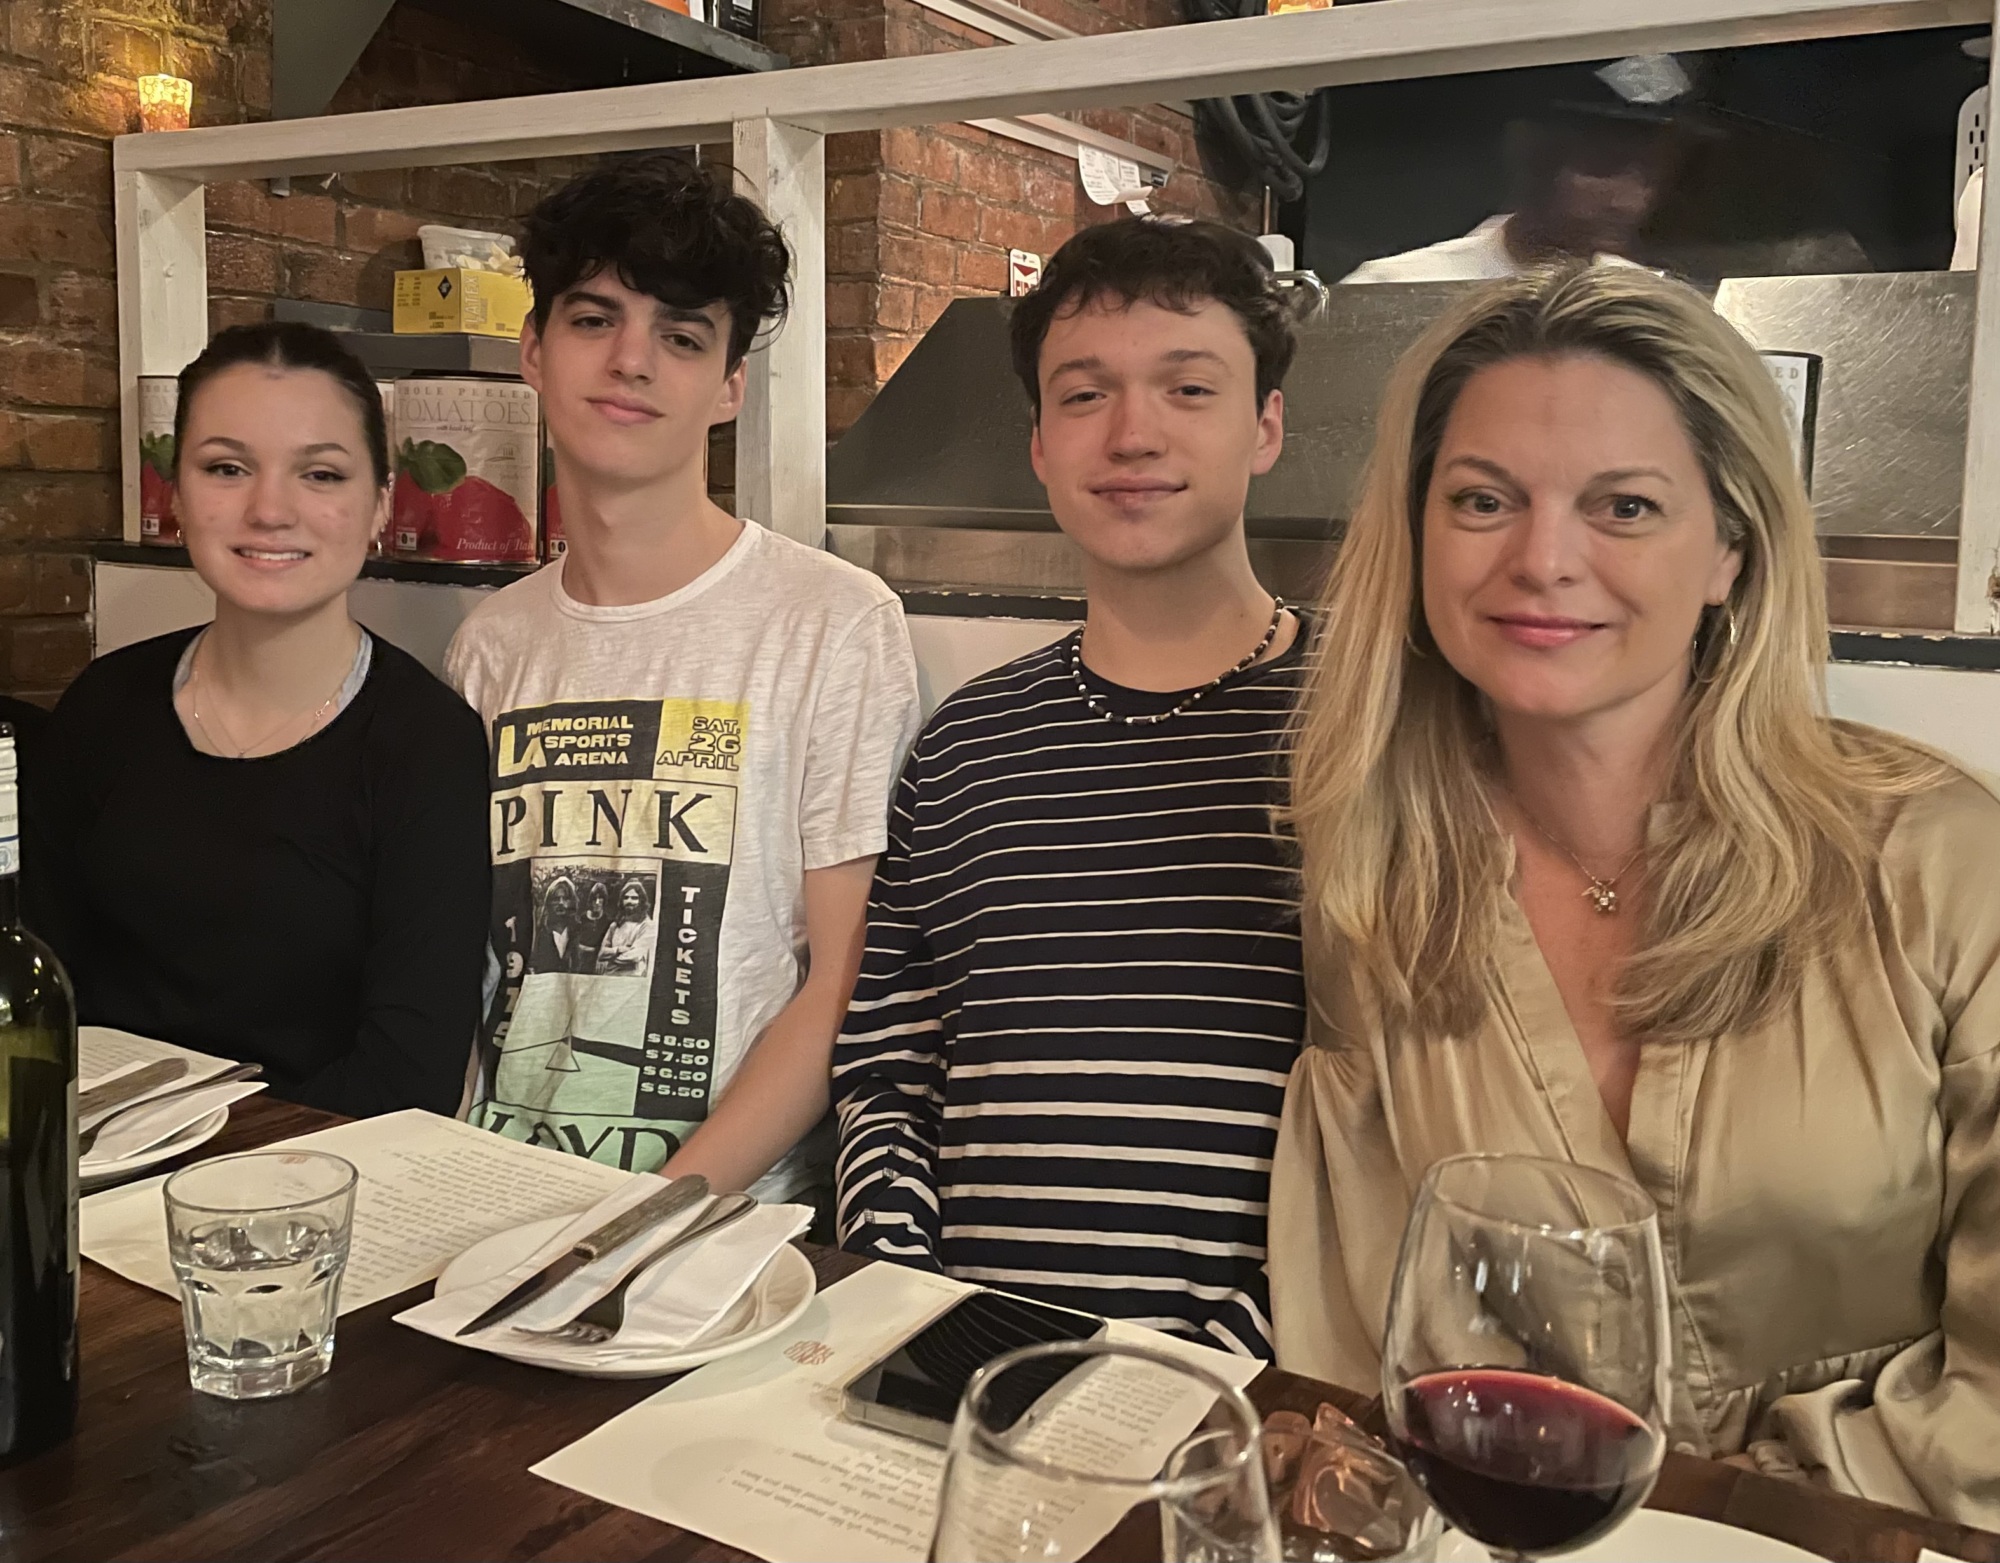 A mother and three teenagers sitting at a restaurant table, smiling at the camera with glasses and a wine bottle on the table.